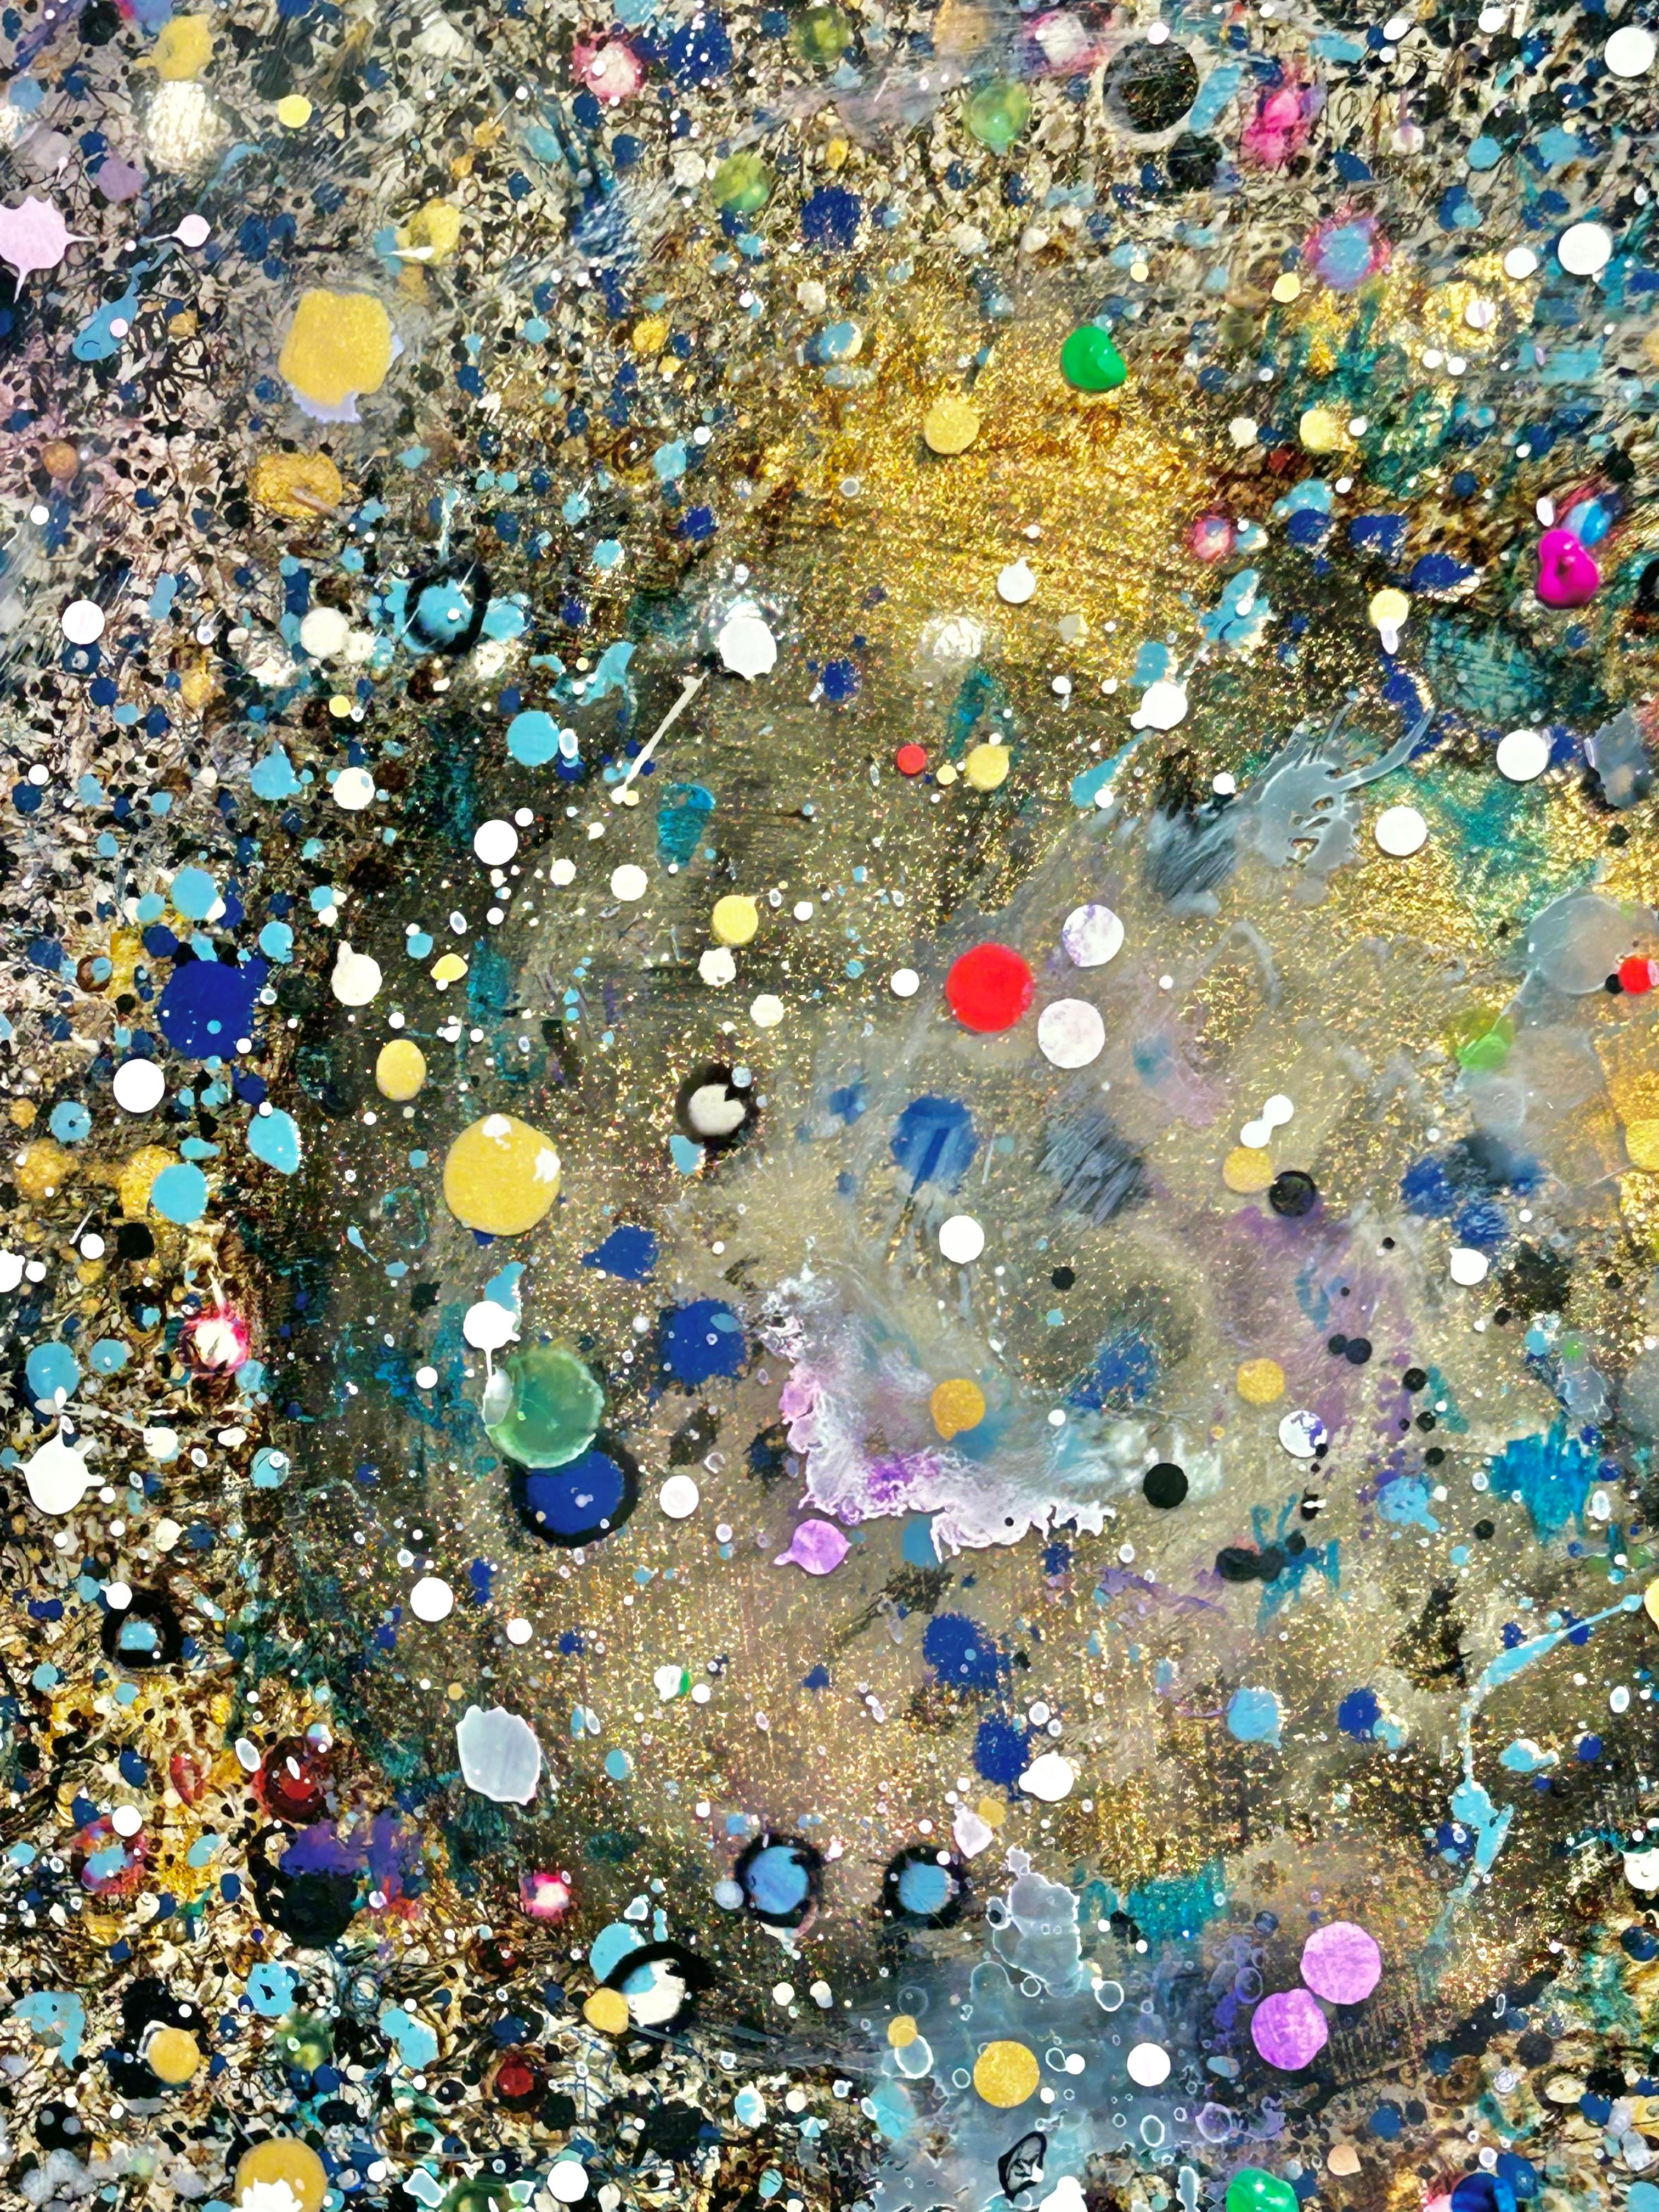 After All, I'm Cosmic Dust - Layered Resin with Paint, Gold Dust and Glitter - Contemporary Painting by Suk Ja Kang